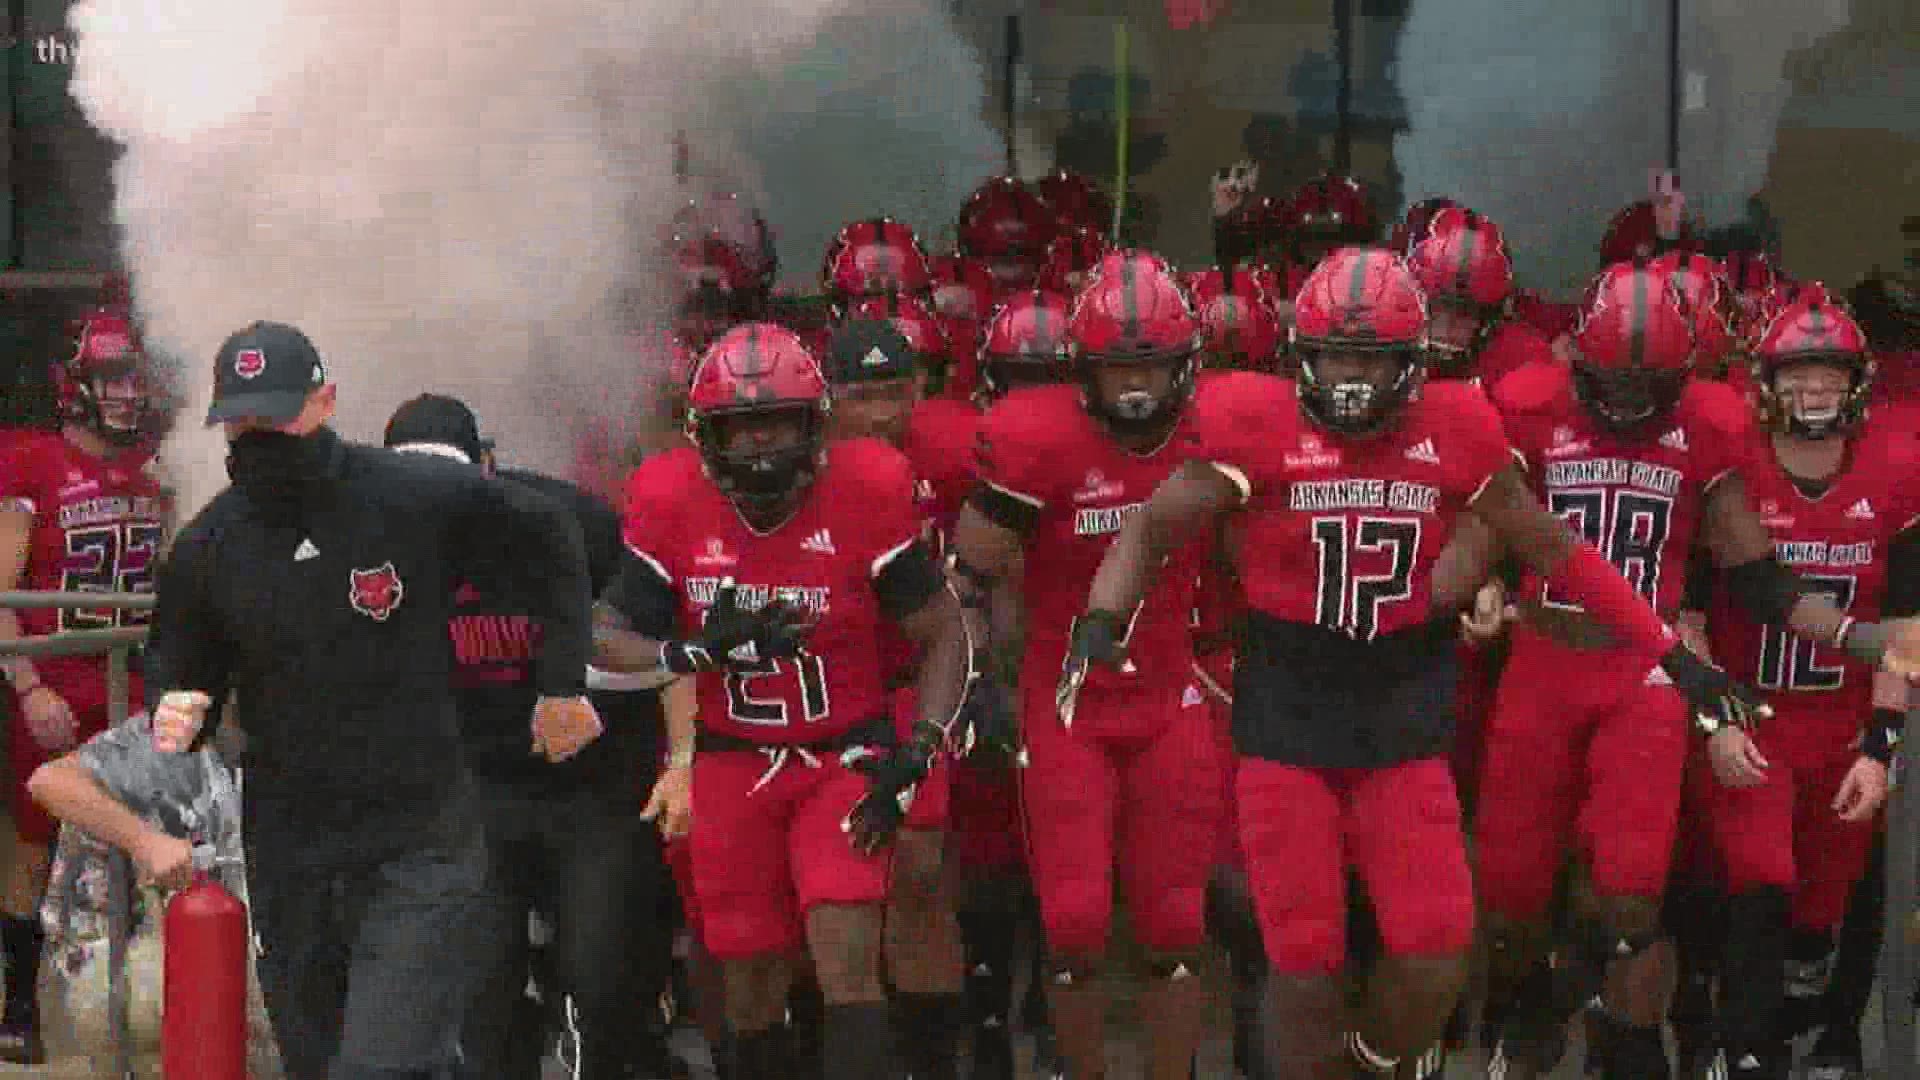 A-State takes down UCA 50-27